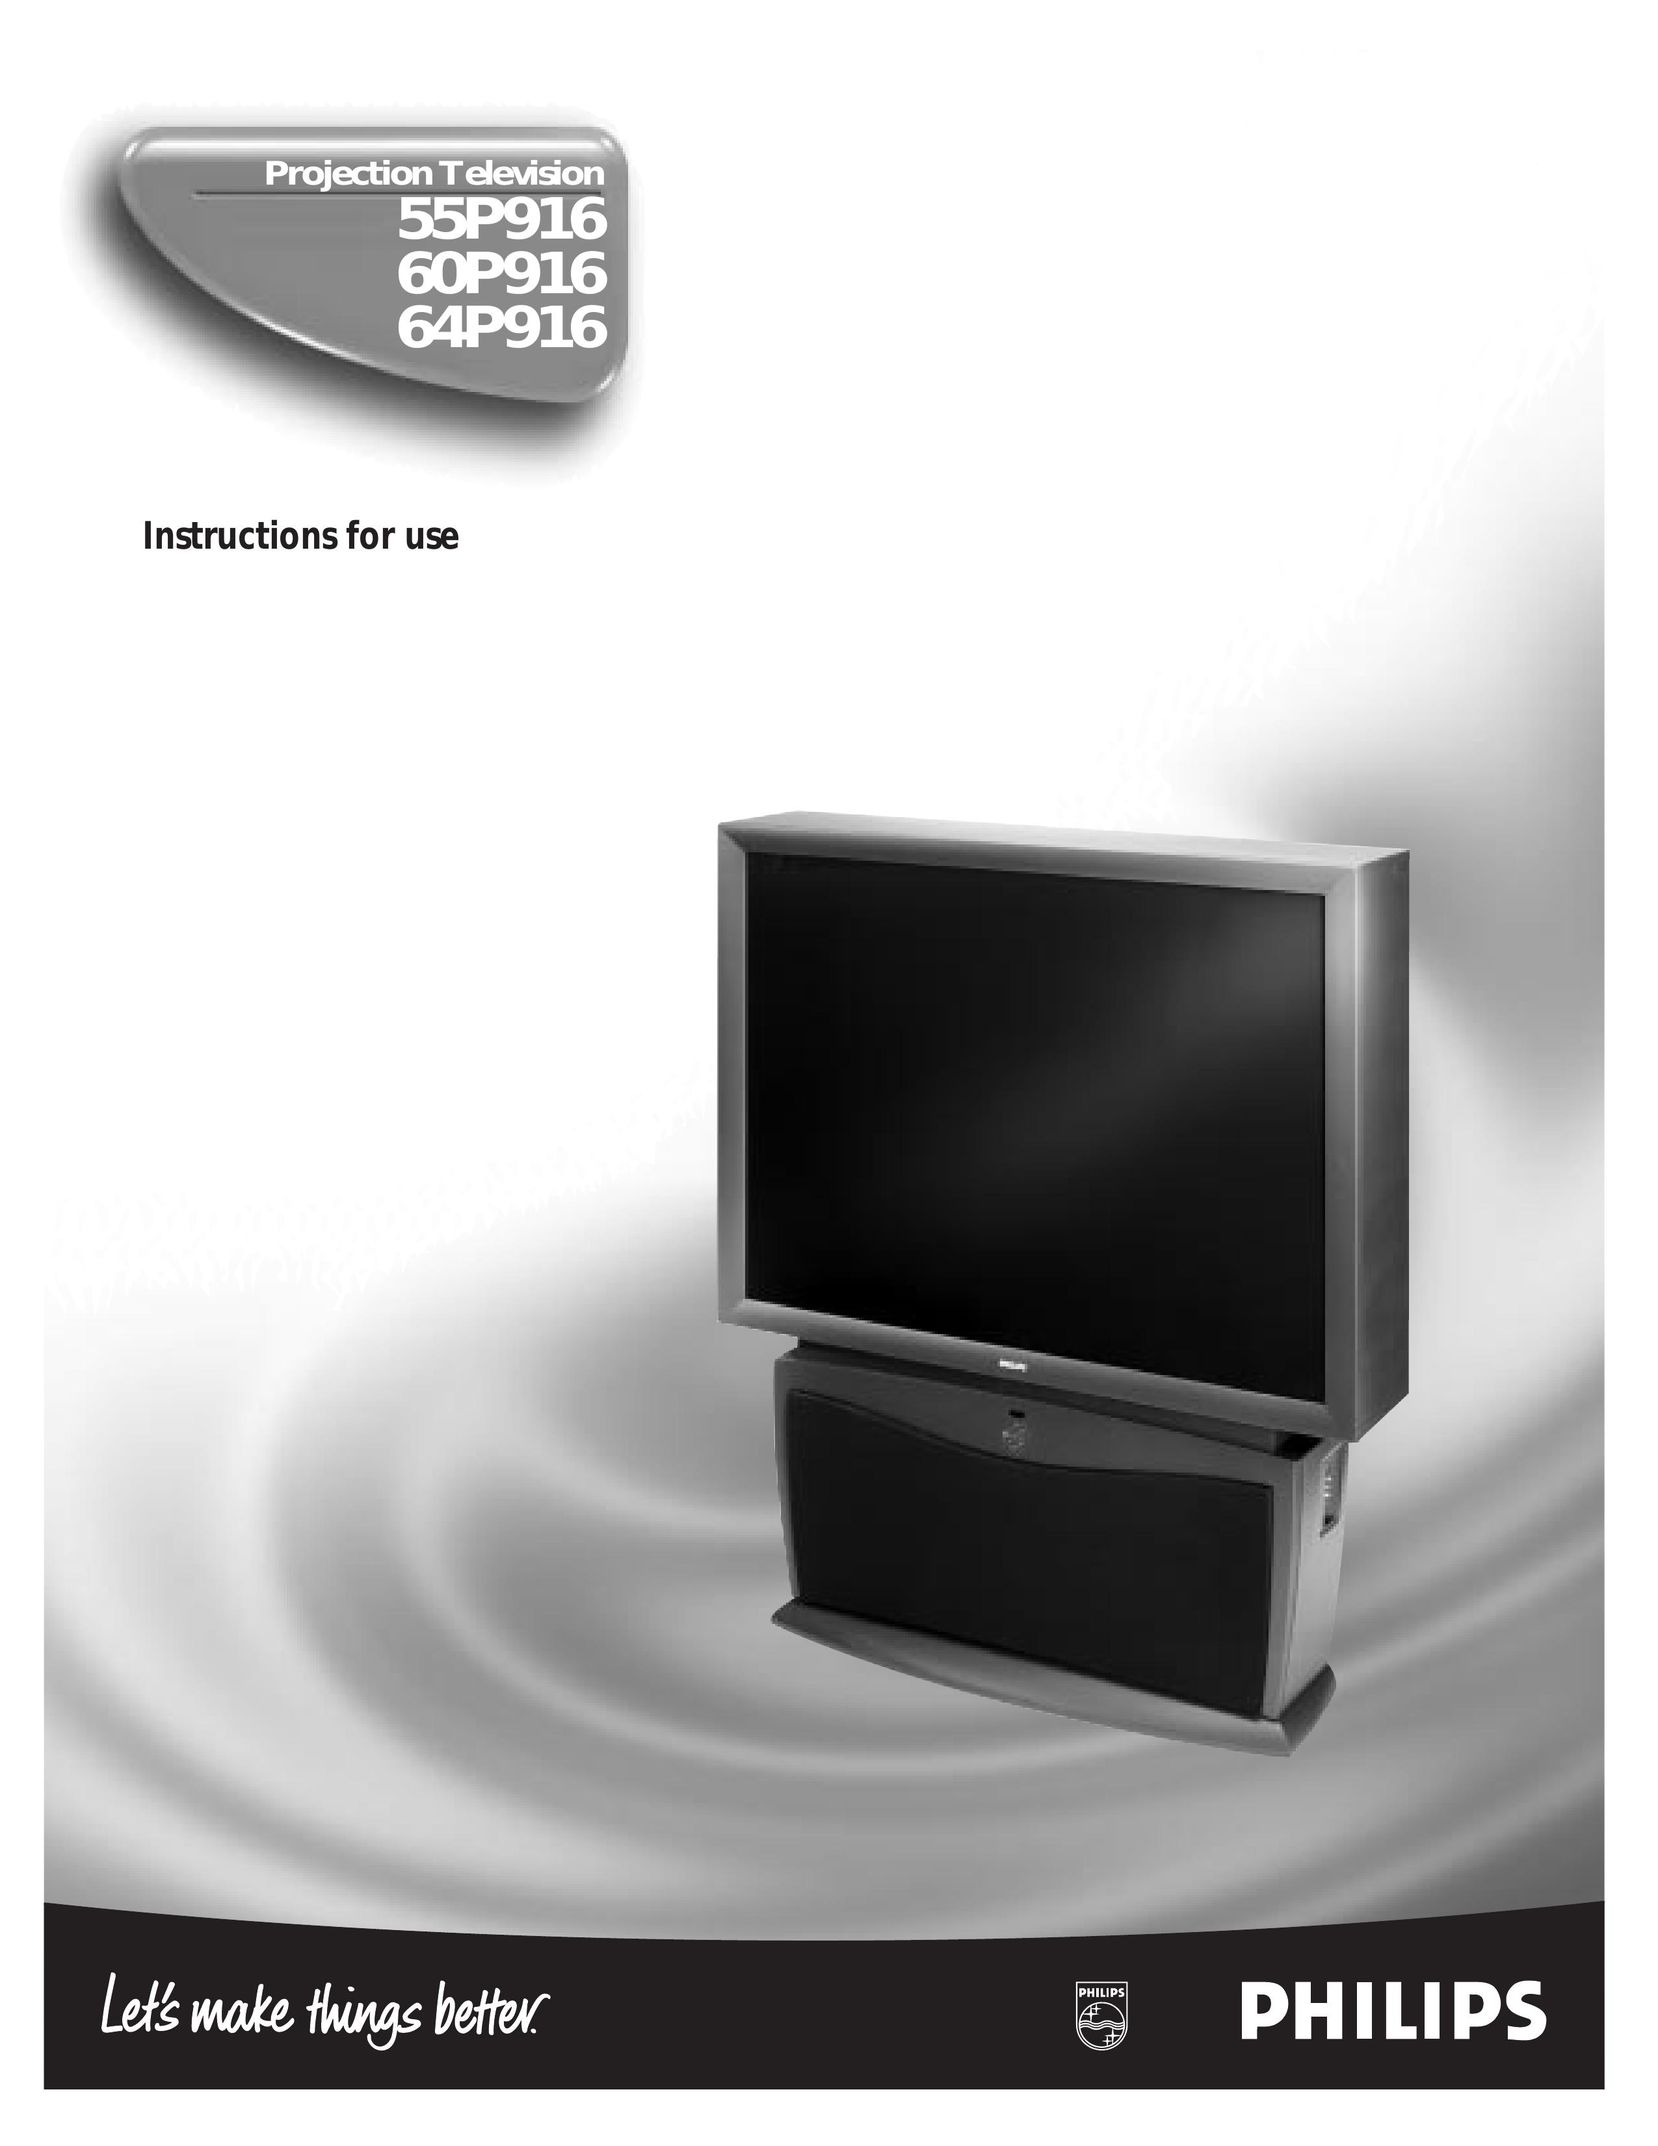 Magnavox 60P916 Projection Television User Manual